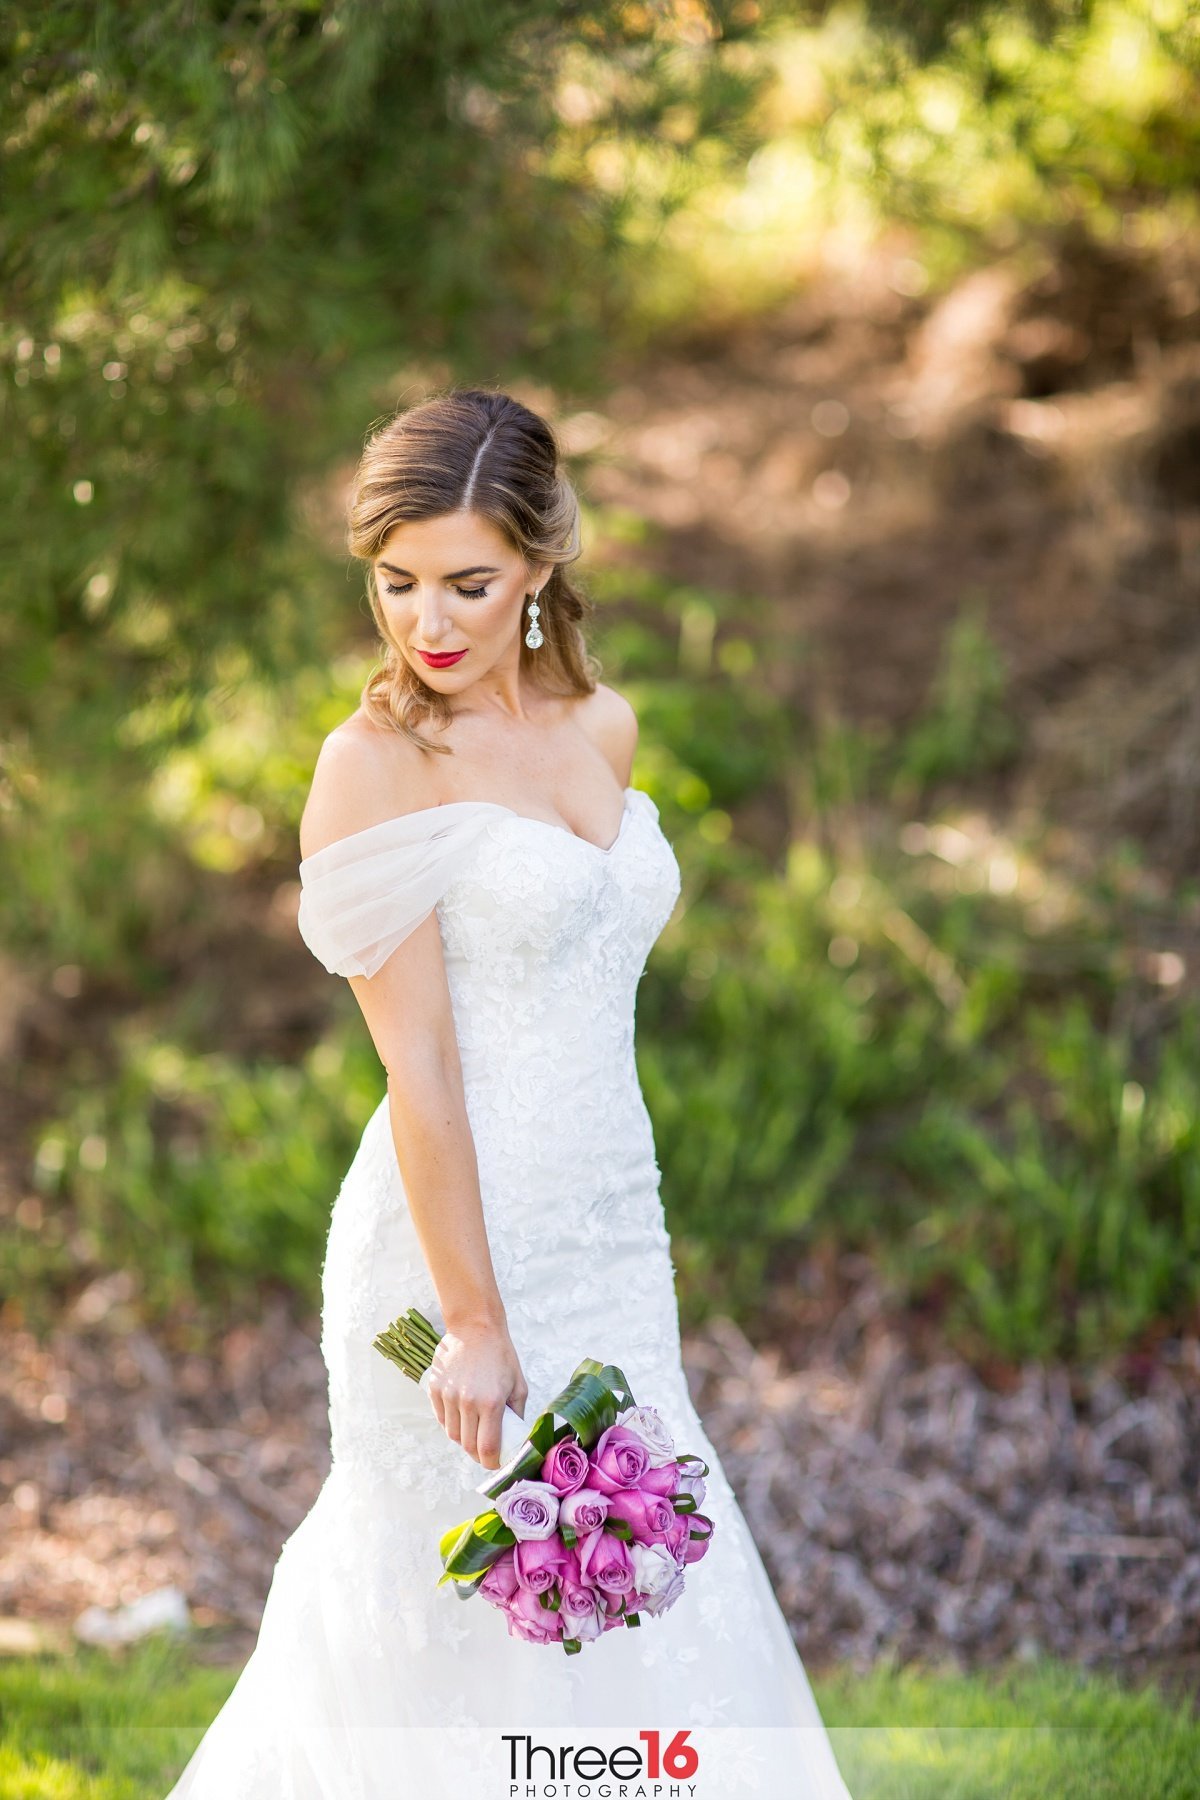 Bride looks down as she poses for wedding photographer